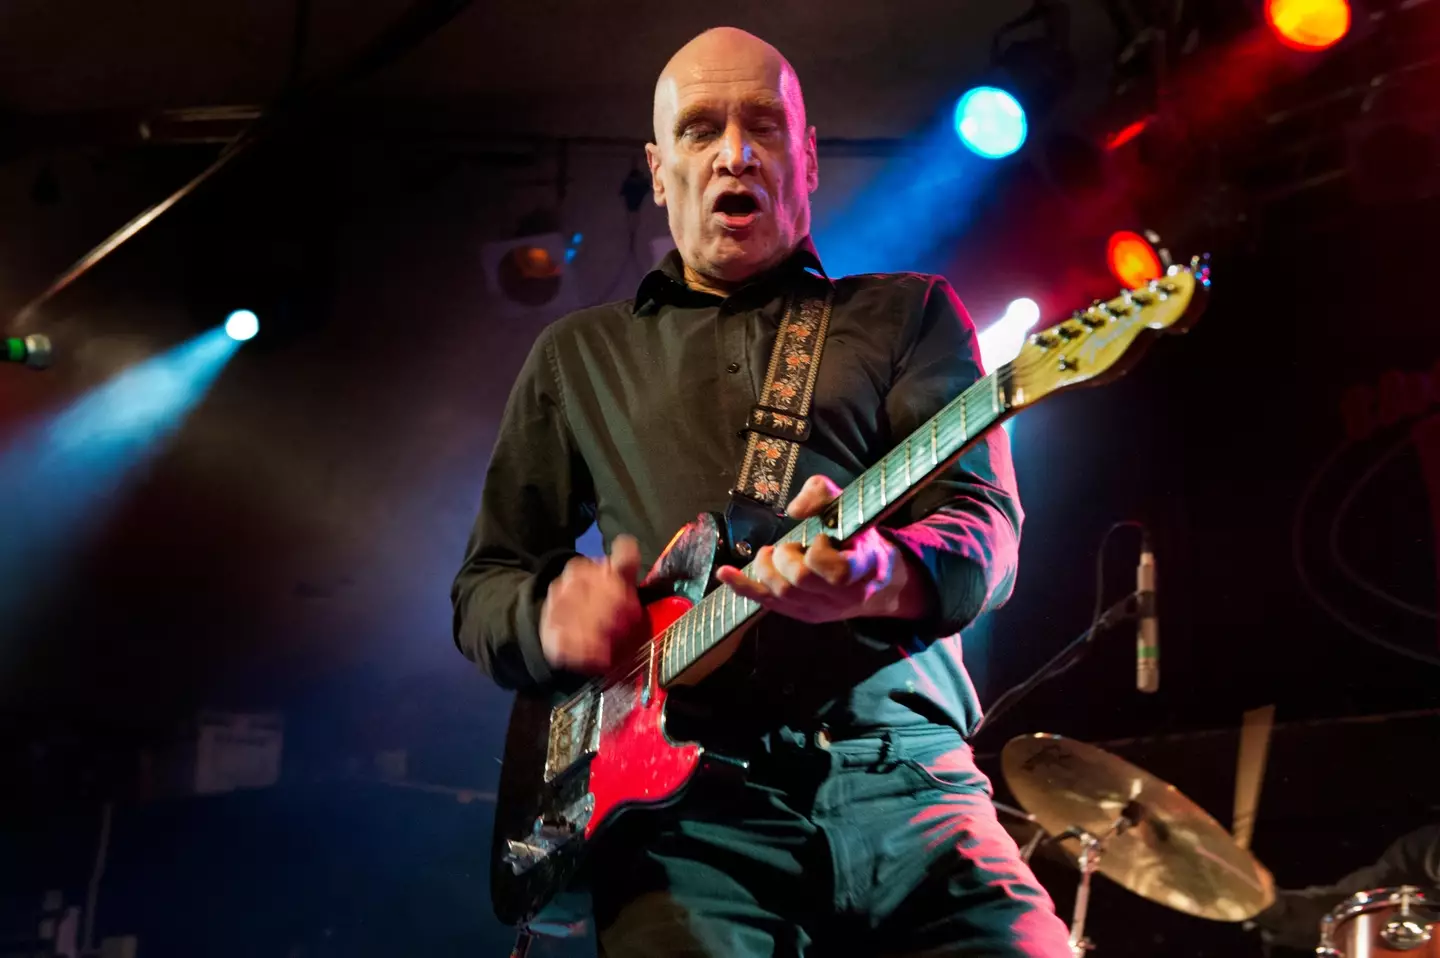 Wilko Johnson was known for his distinctive guitar style.